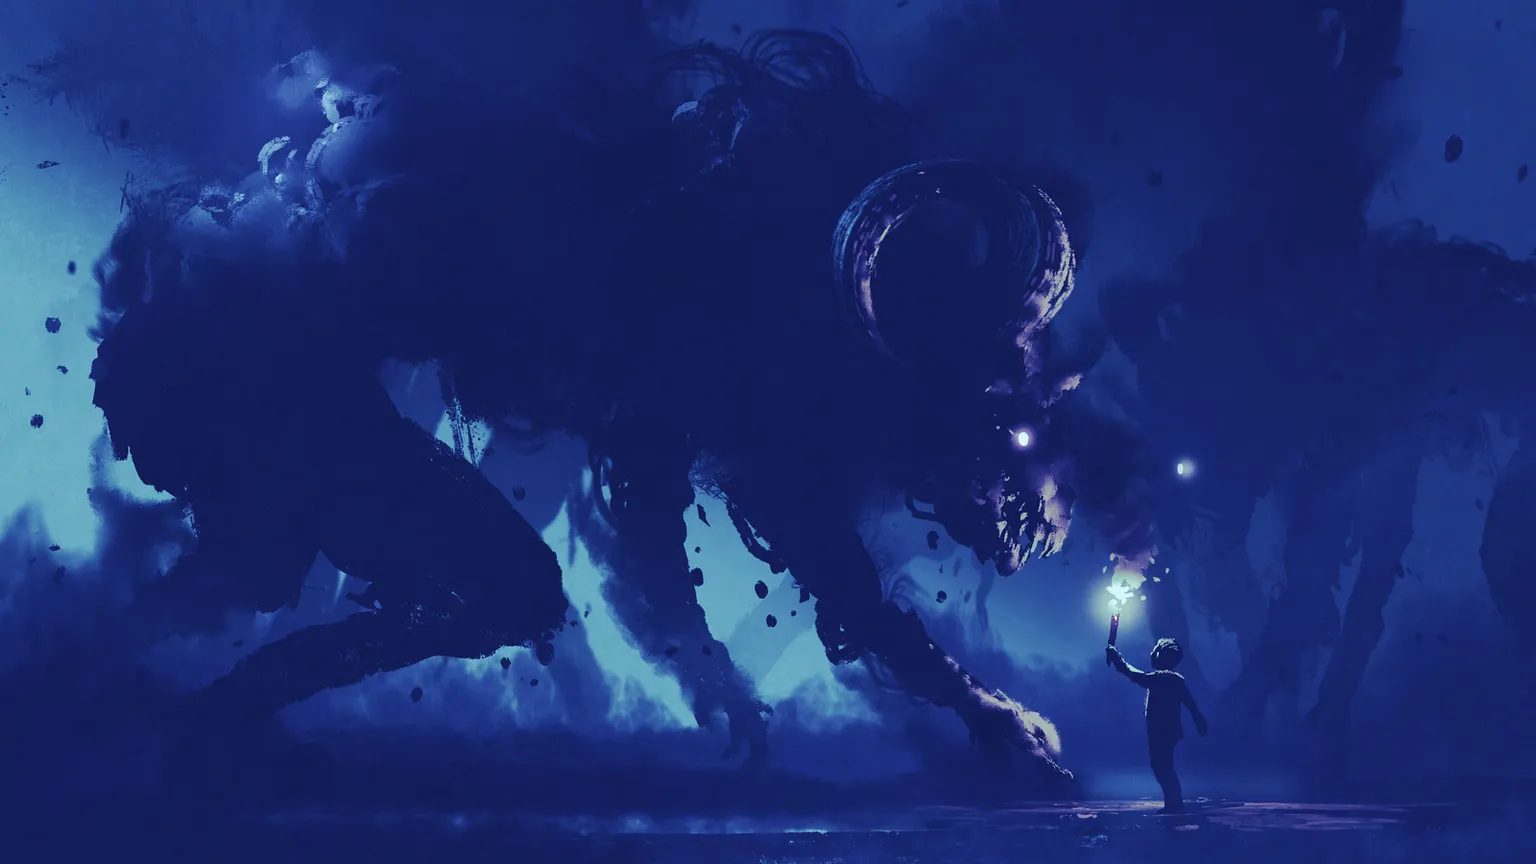 dark fantasy concept showing the boy with a torch facing smoke monsters with demon's horns, digital art style, illustration painting; Shutterstock ID 695511787; Client/Licensee: decryptmedia